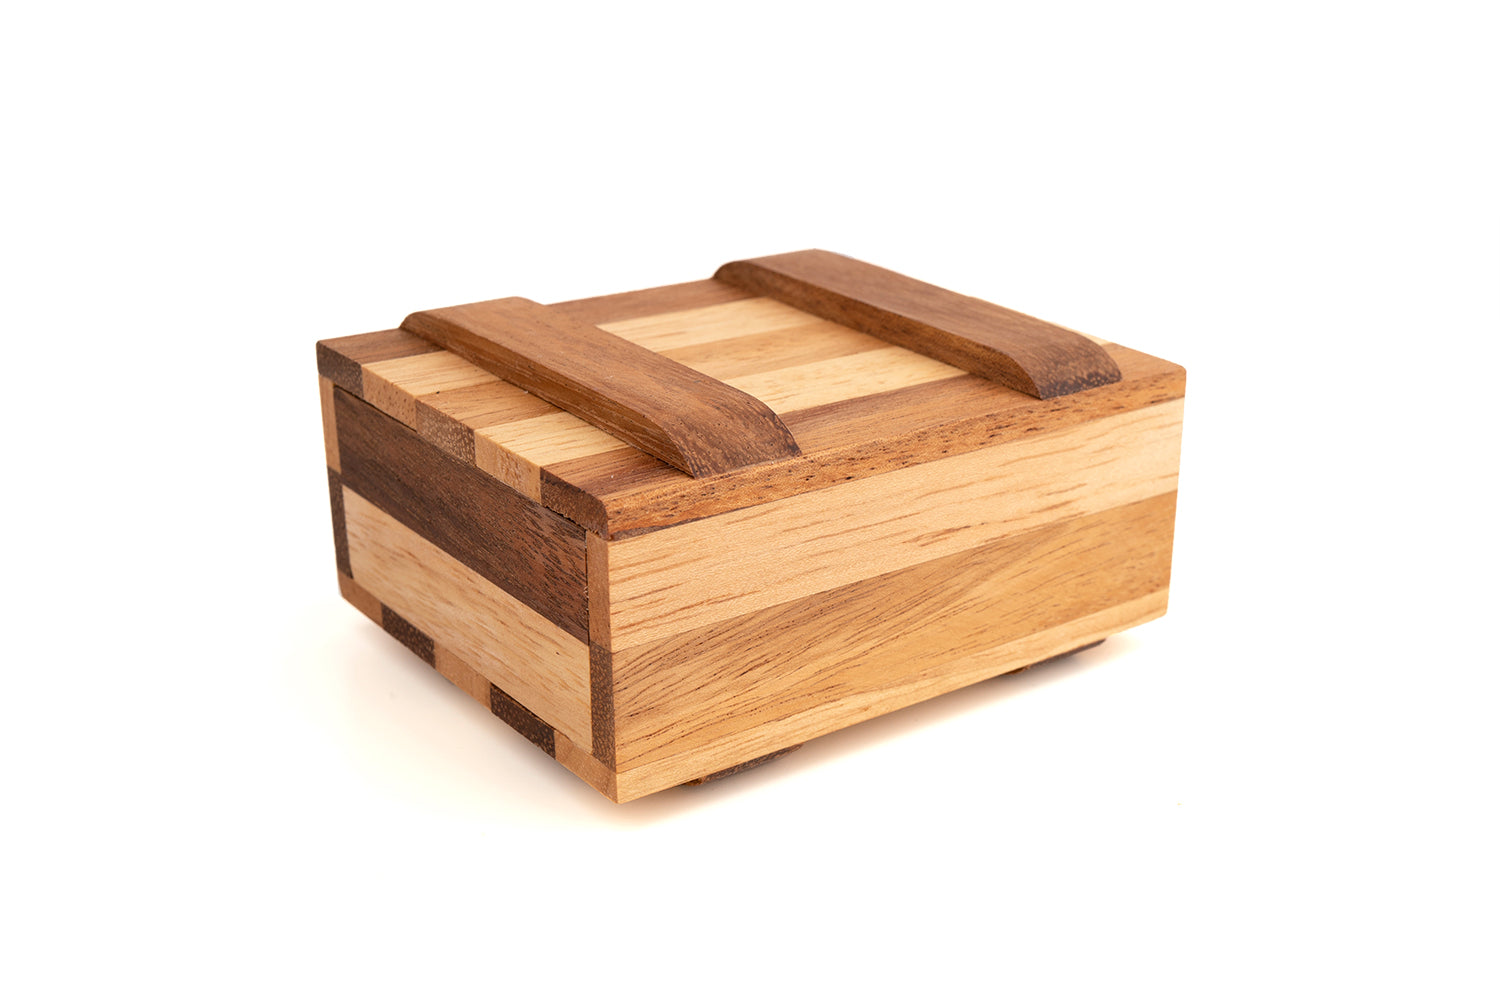 Secret Opening Puzzle Box - Wood Puzzle Box S - 2.62x3.57x1.2 Inches